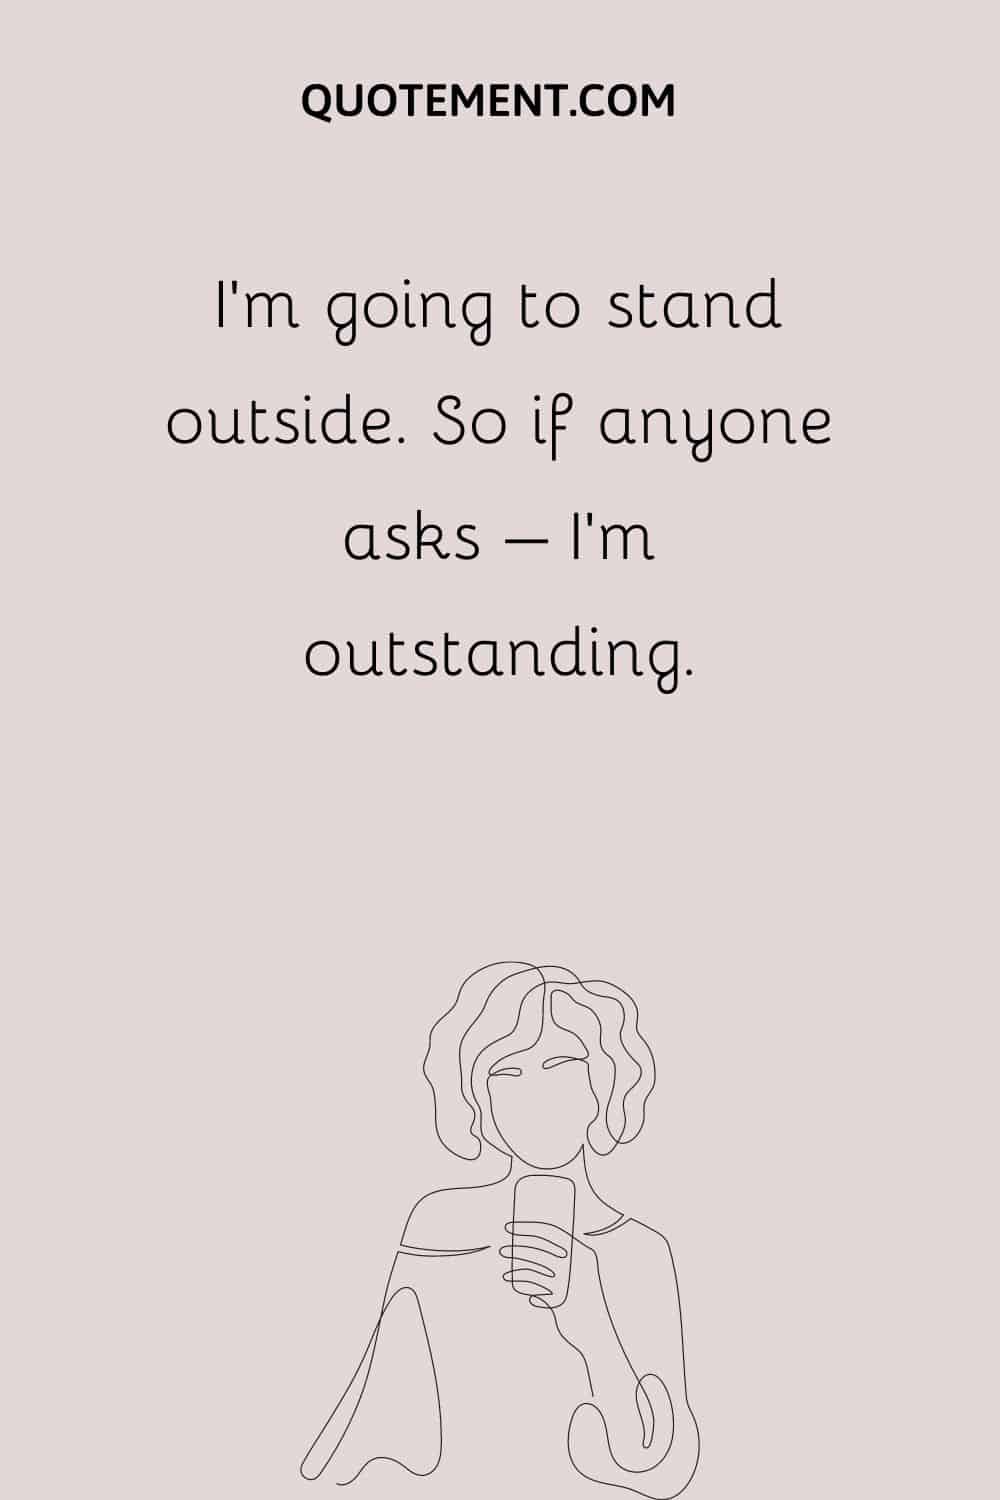 I’m going to stand outside. So if anyone asks – I’m outstanding.